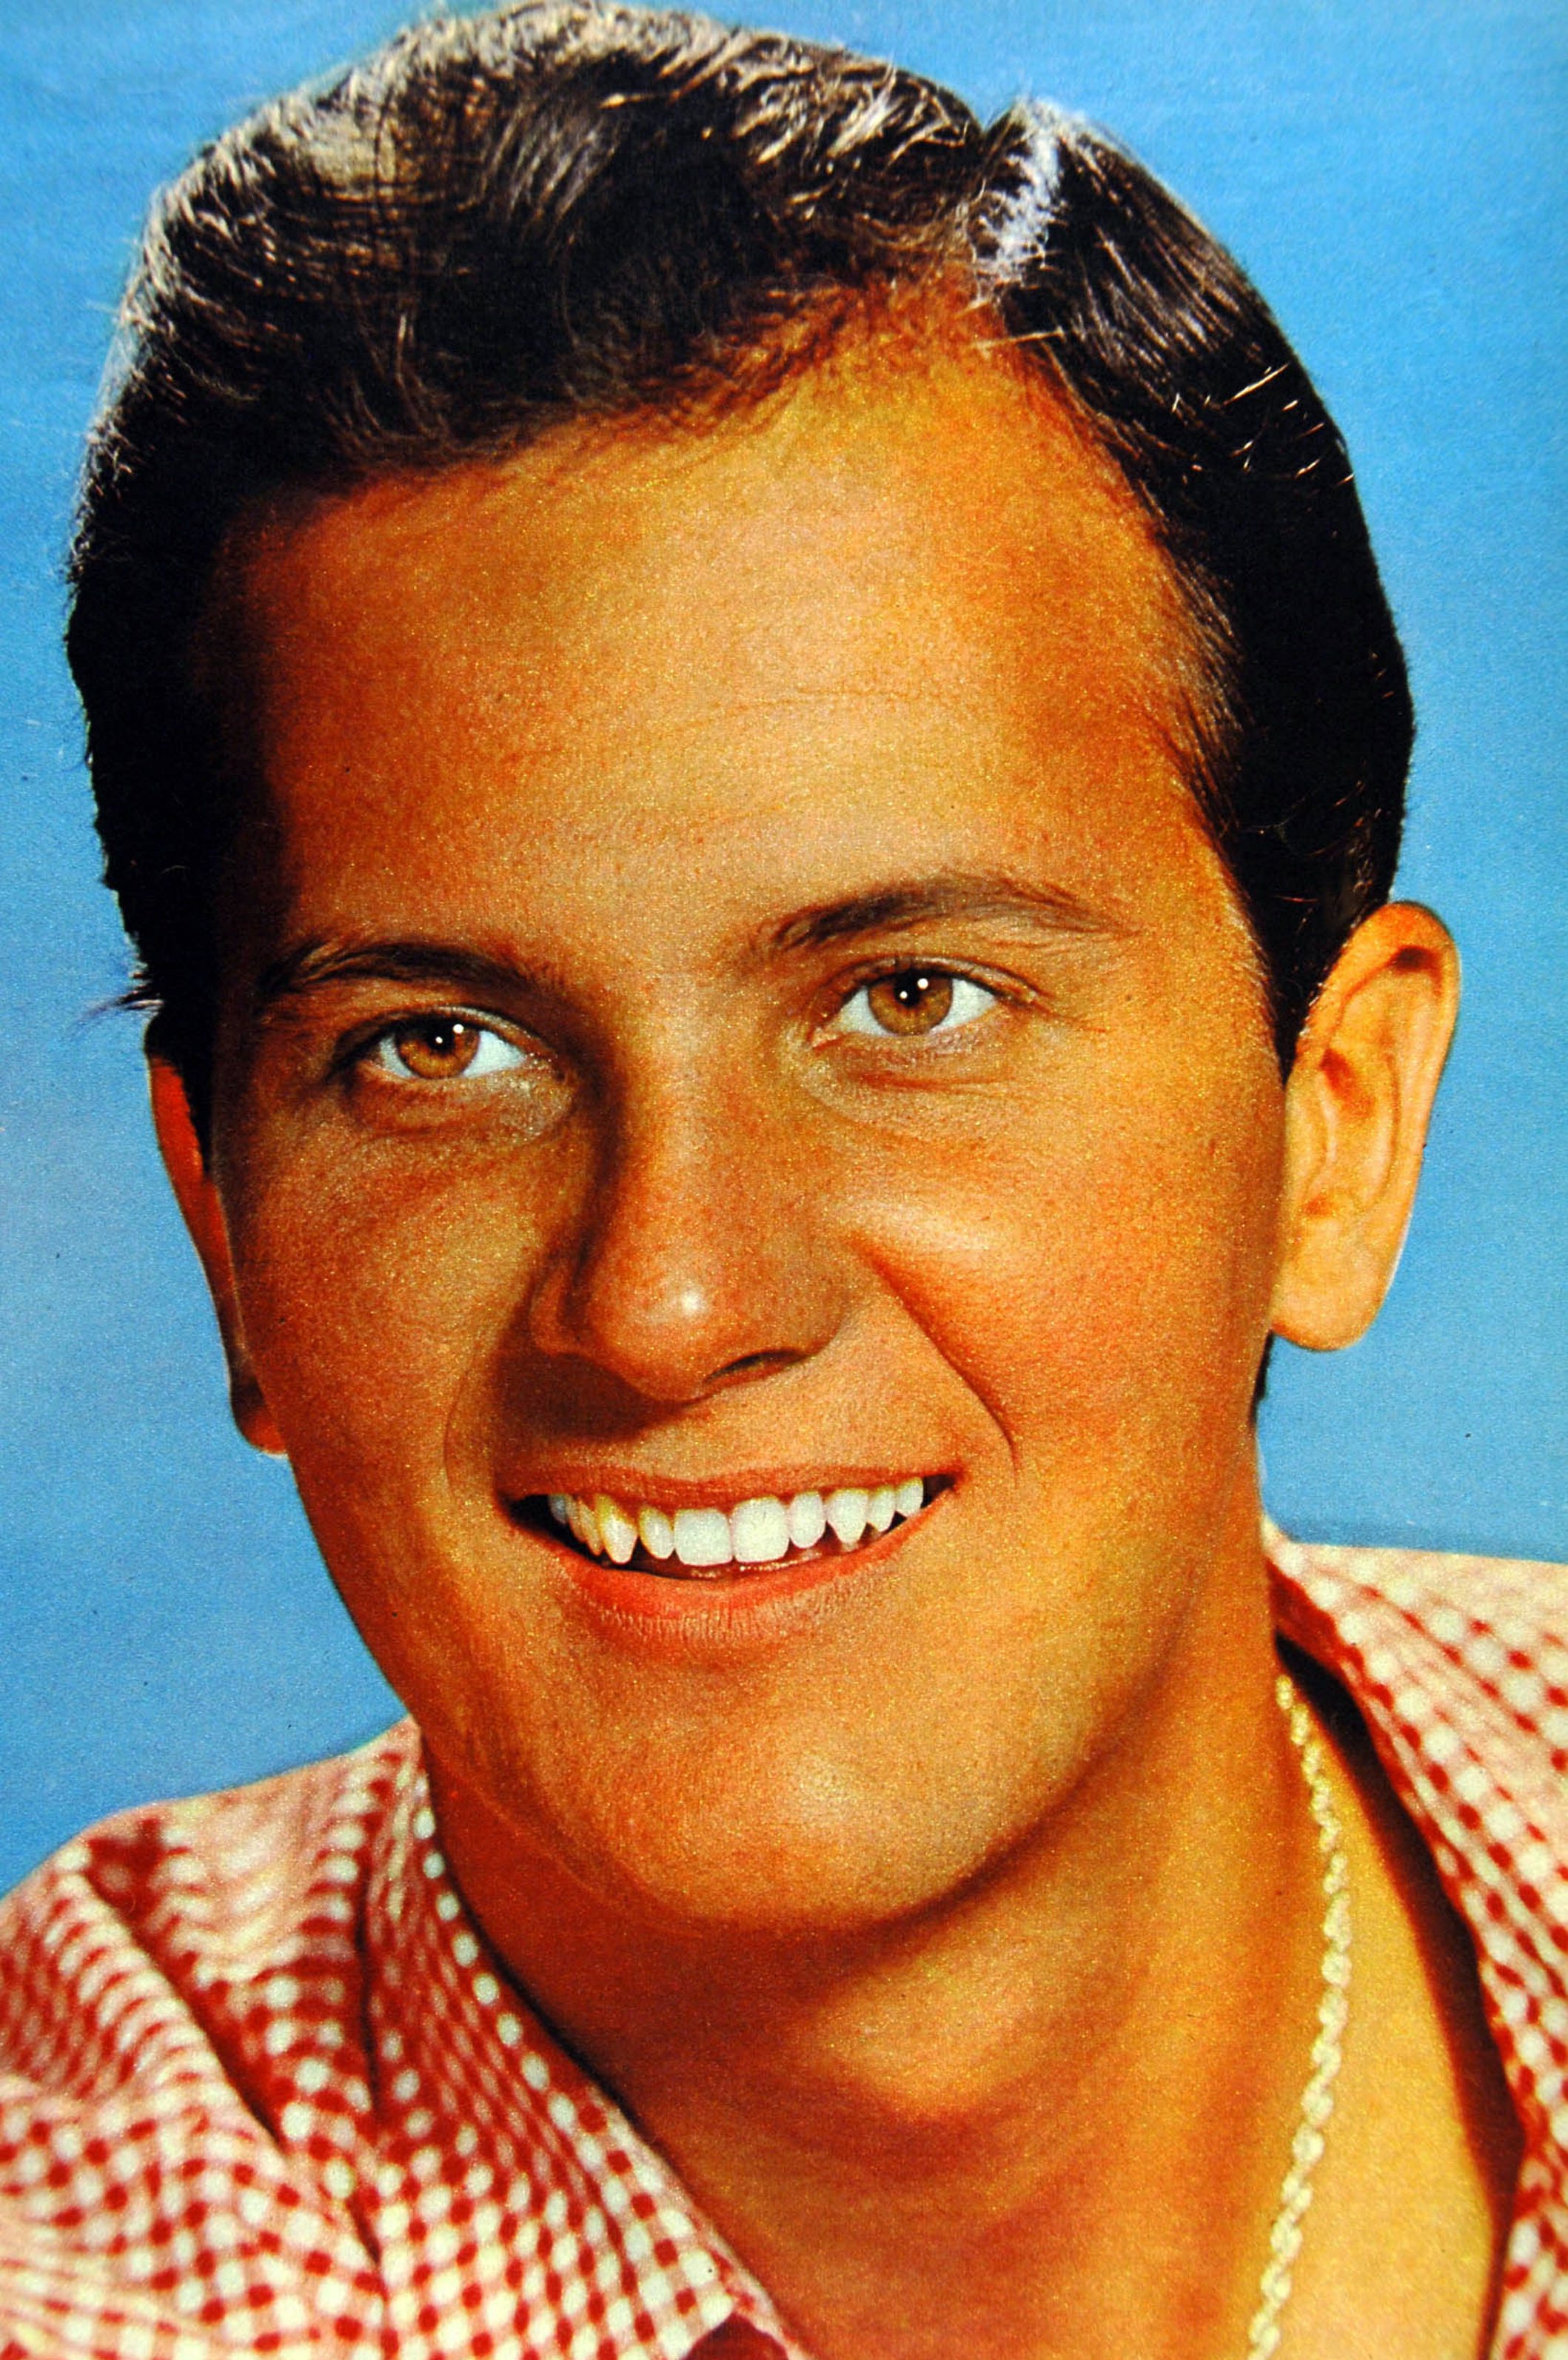 Pat Boone circa 1950 | Source: Getty Images